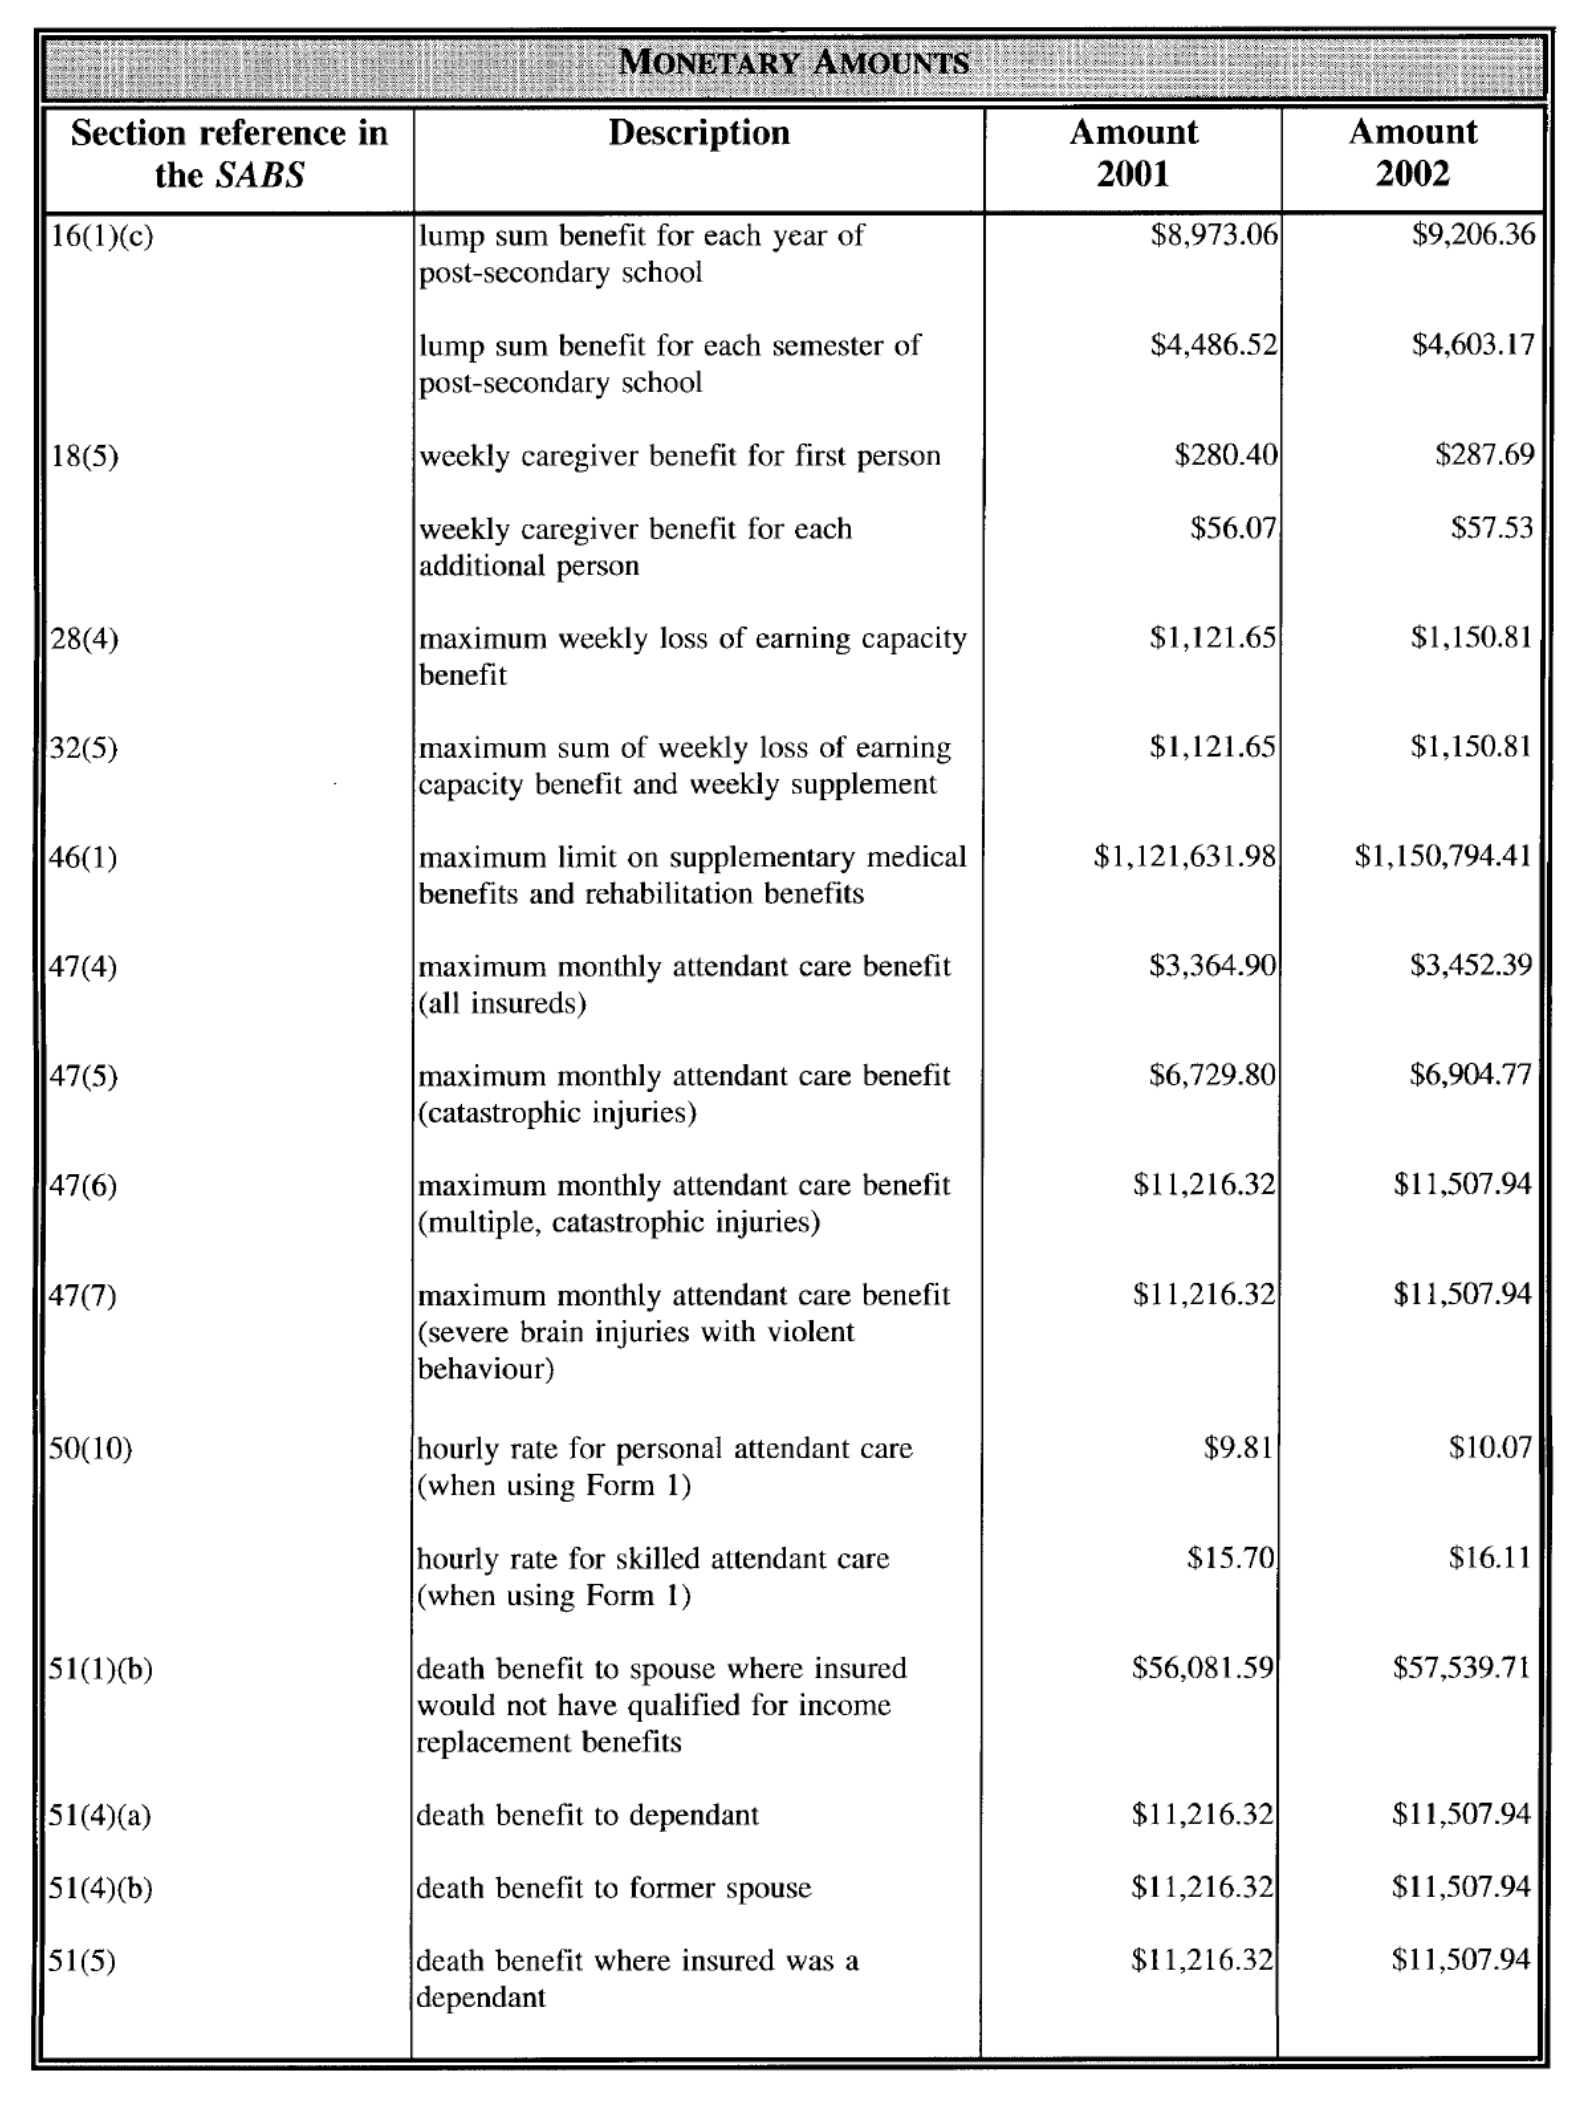 Table containing list of Indexation Percentage, Revised Deductibles and Monetary Amounts for Automobile Insurance under the Insurance Act and the Statutory Accident Benefits Schedule - Accidents After December 31, 1993 And Before November 1, 1996 in 2002 with corresponding descriptions and amounts/percentages